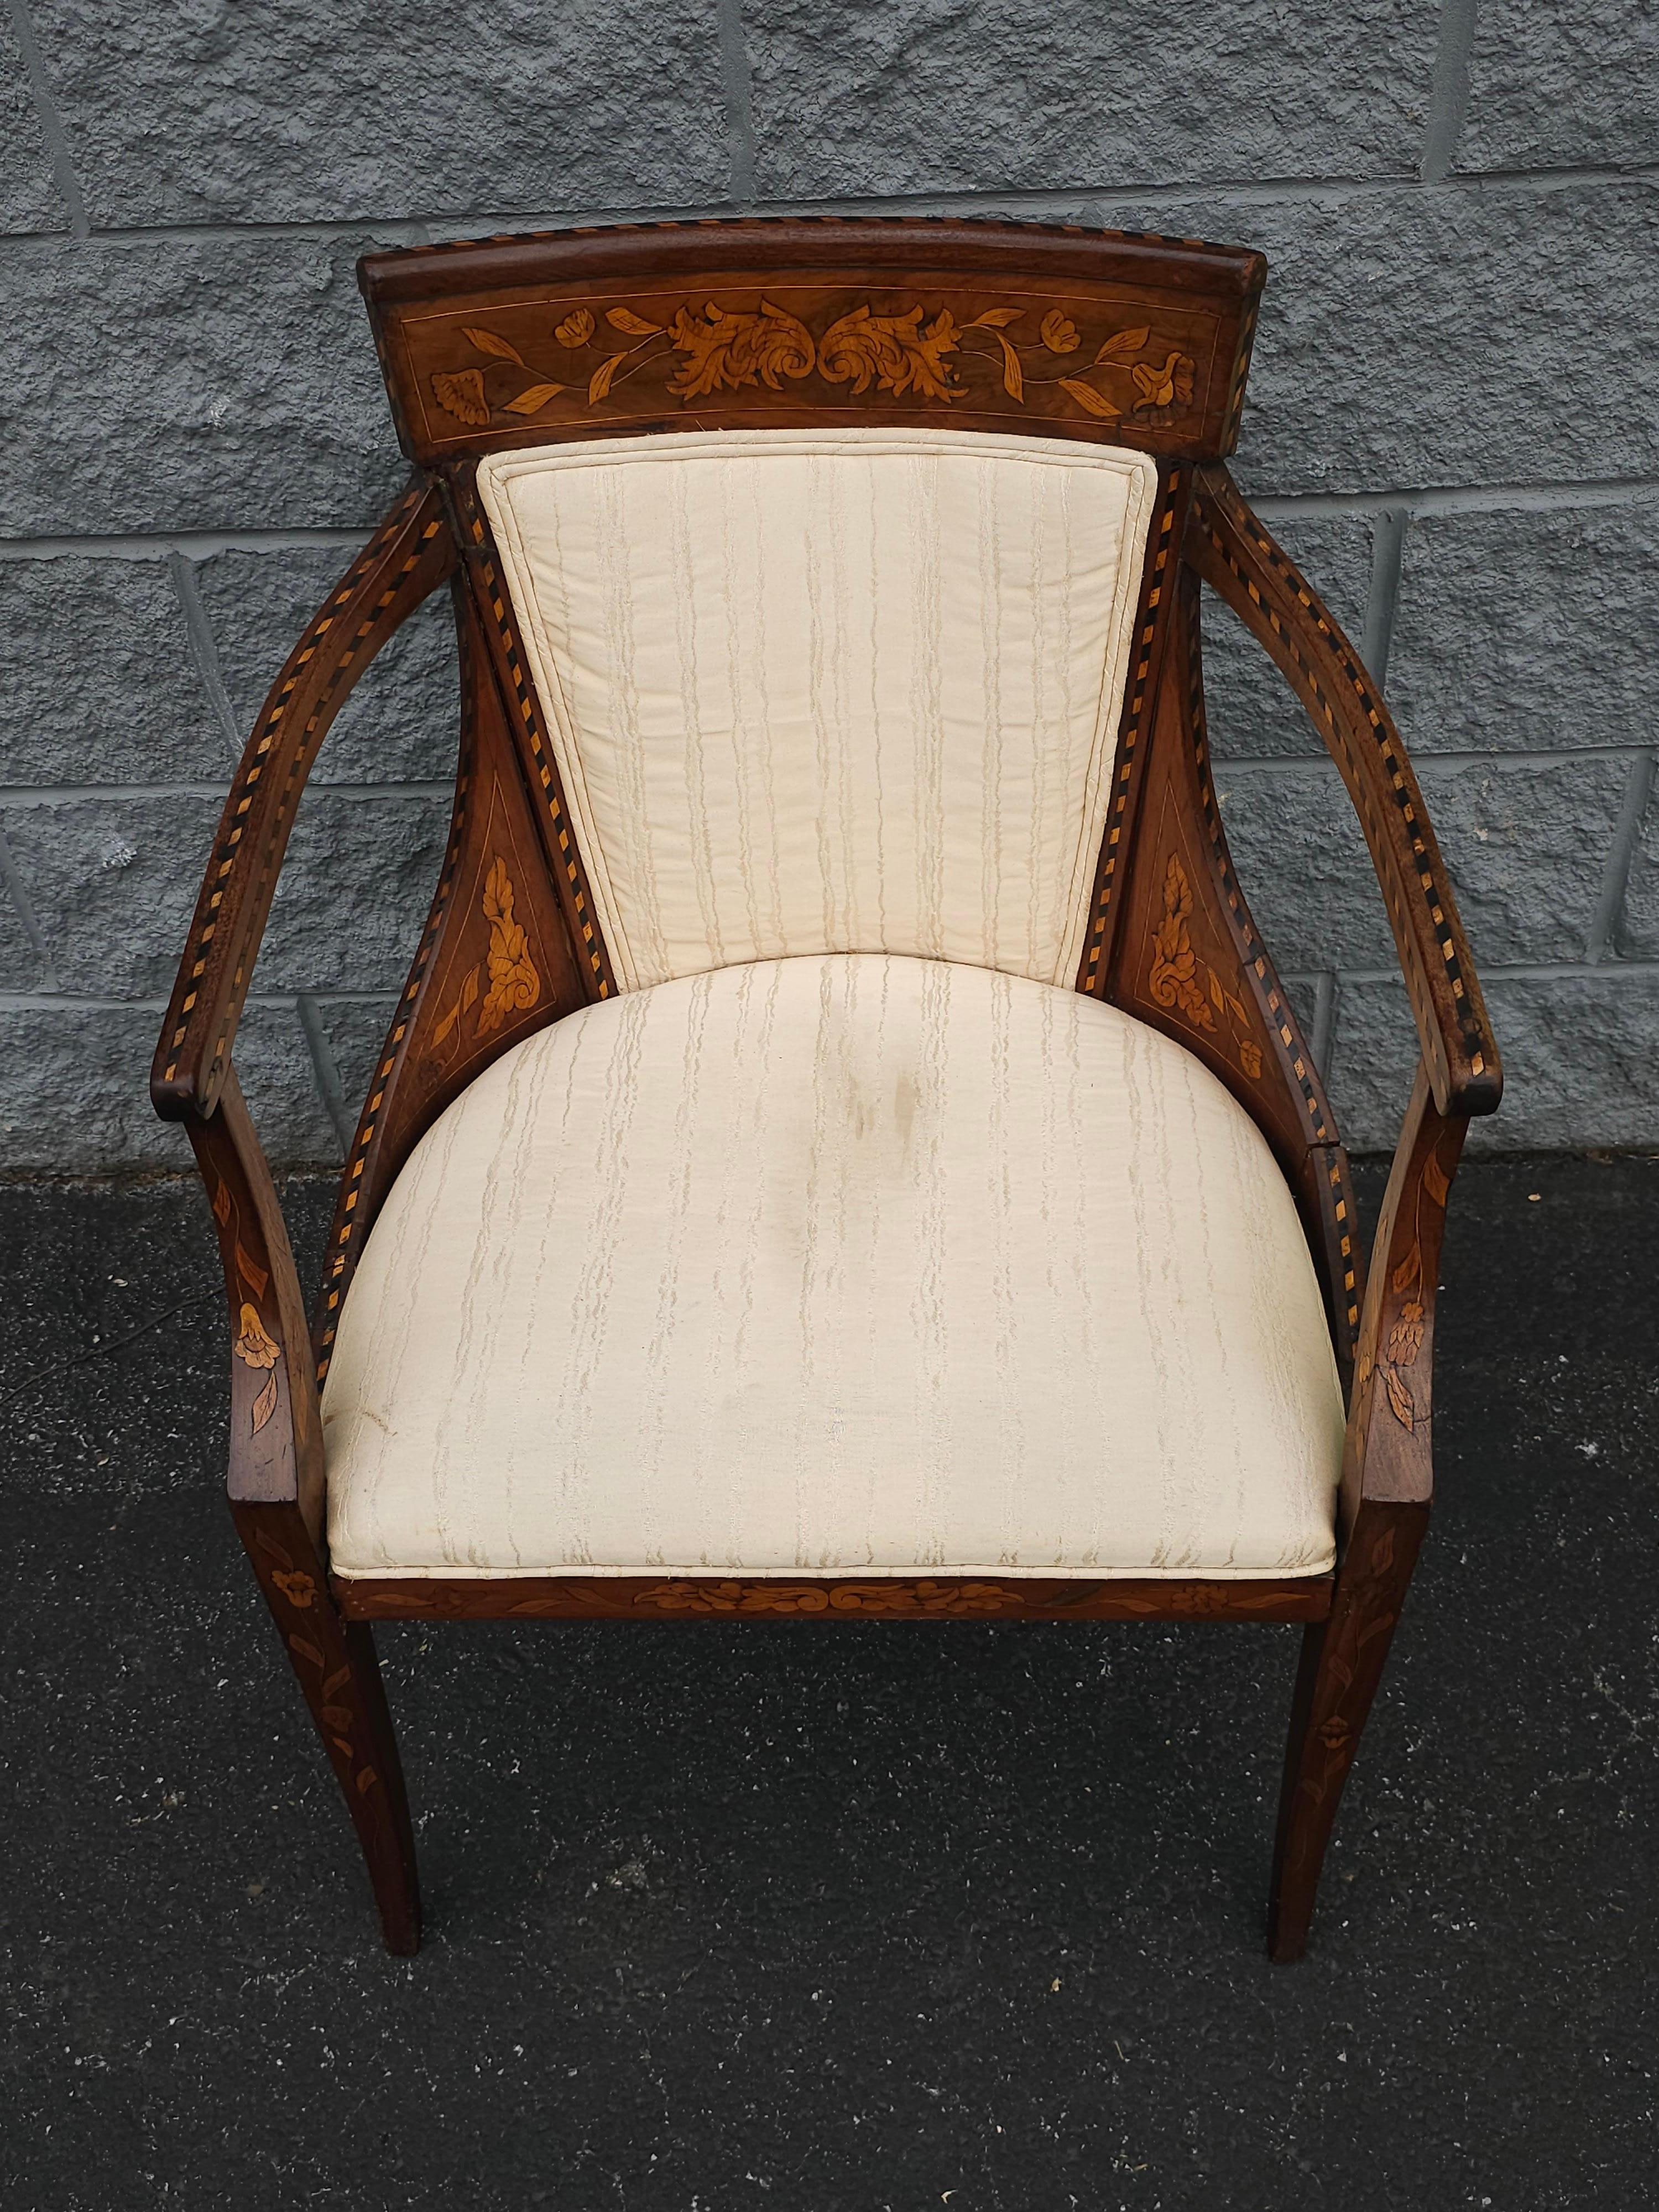 18th Century Neoclassical Dutch Marquetry And Upholstered Armchair In Good Condition For Sale In Germantown, MD